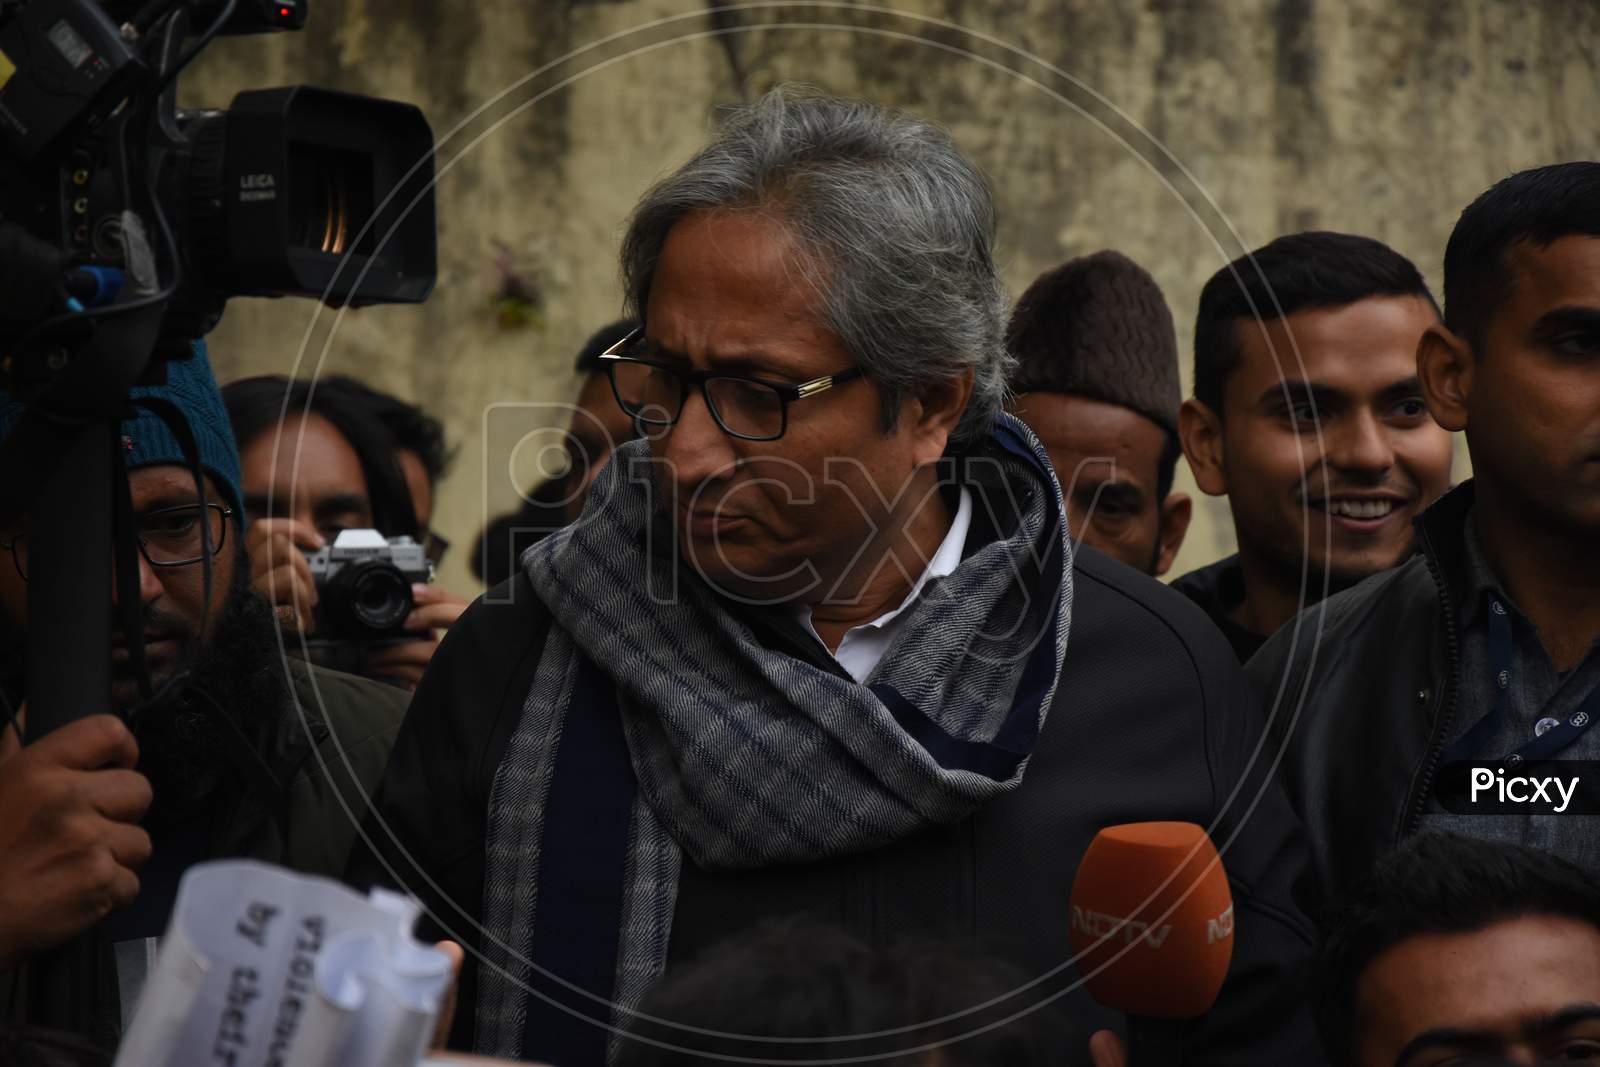 Ravish kumar from NDTV at Jantar antar in the protest against CAB+NRC & Police brutality.